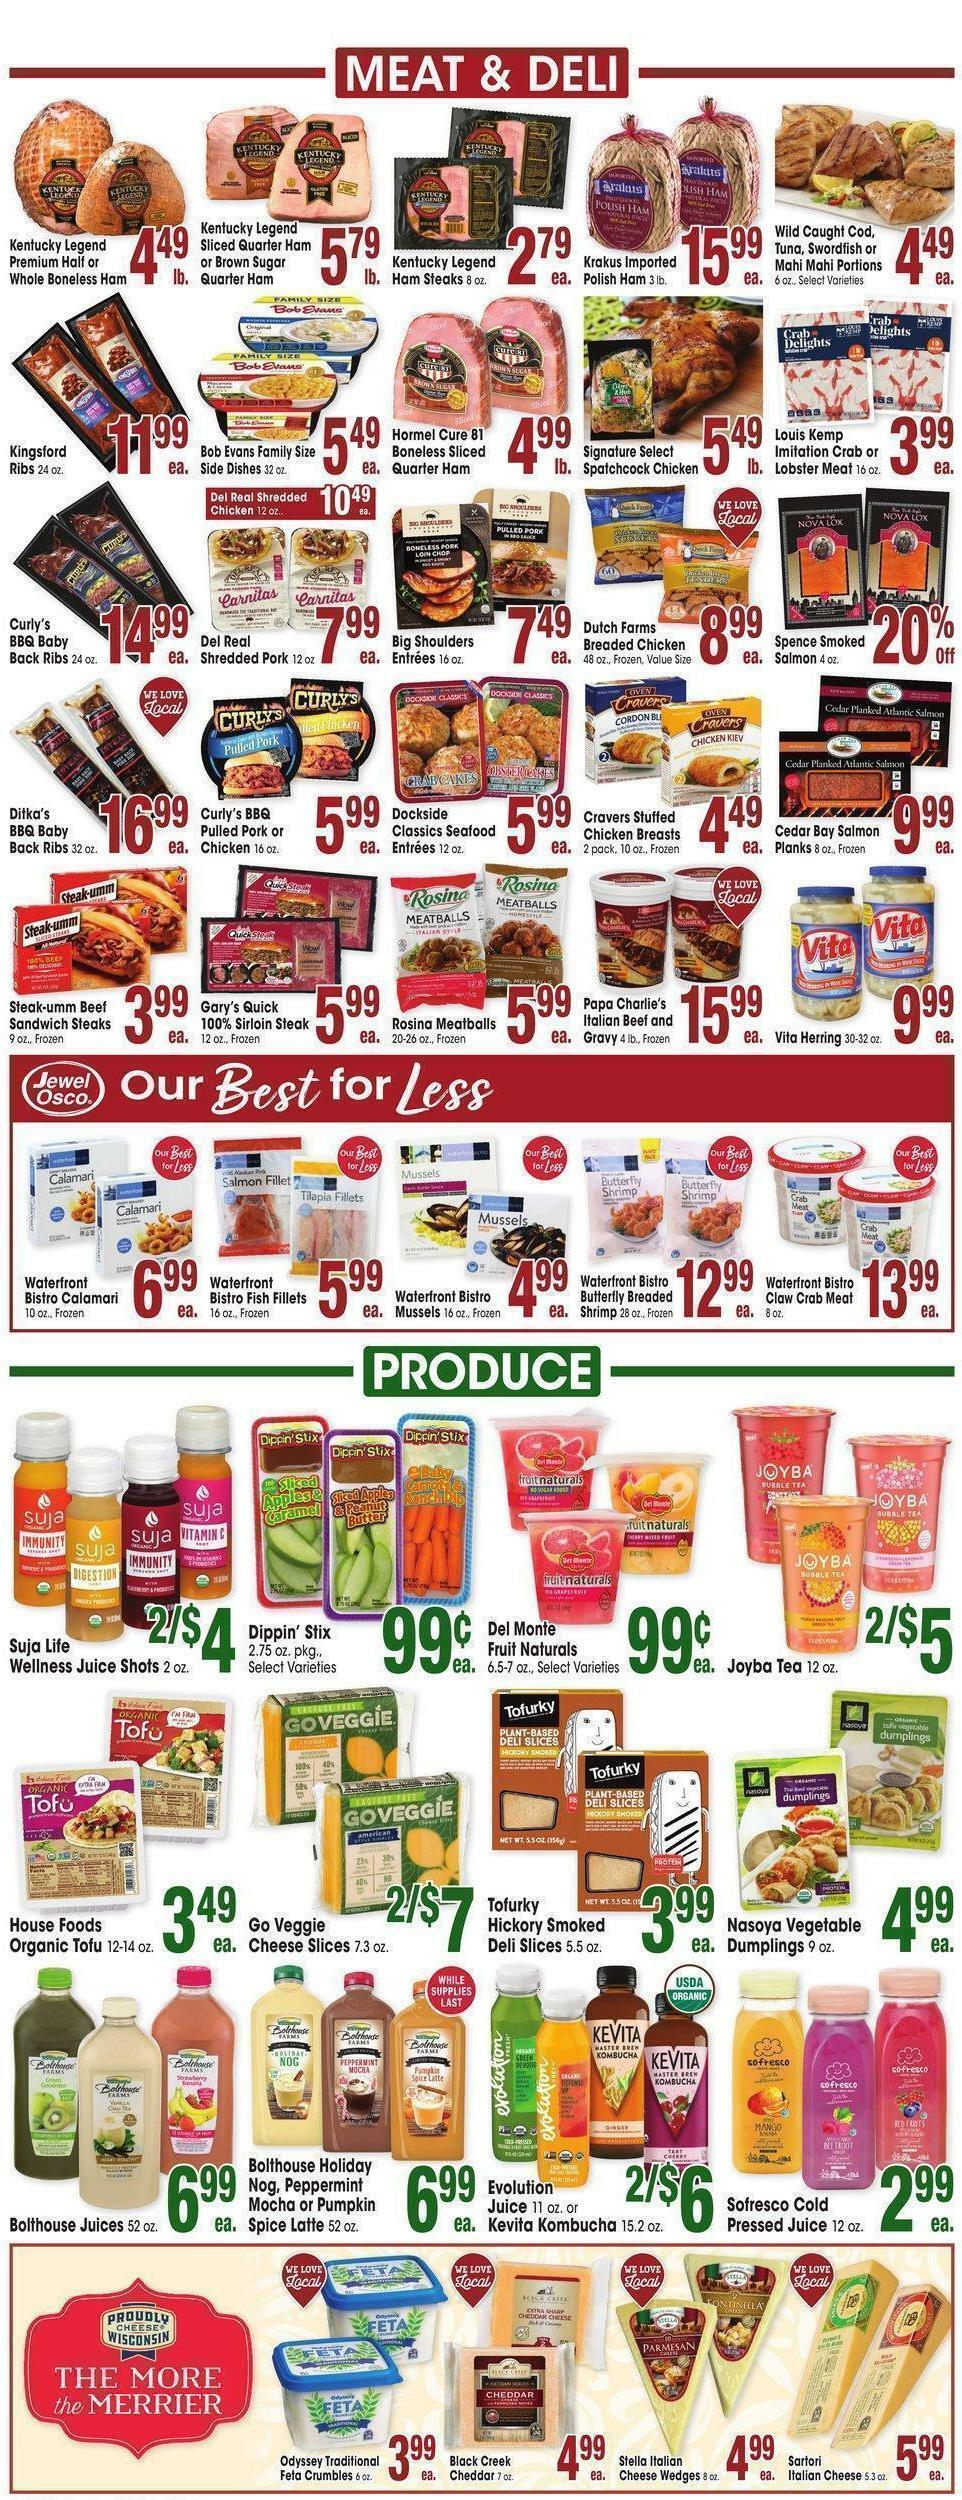 Jewel Osco Weekly Ad from December 7